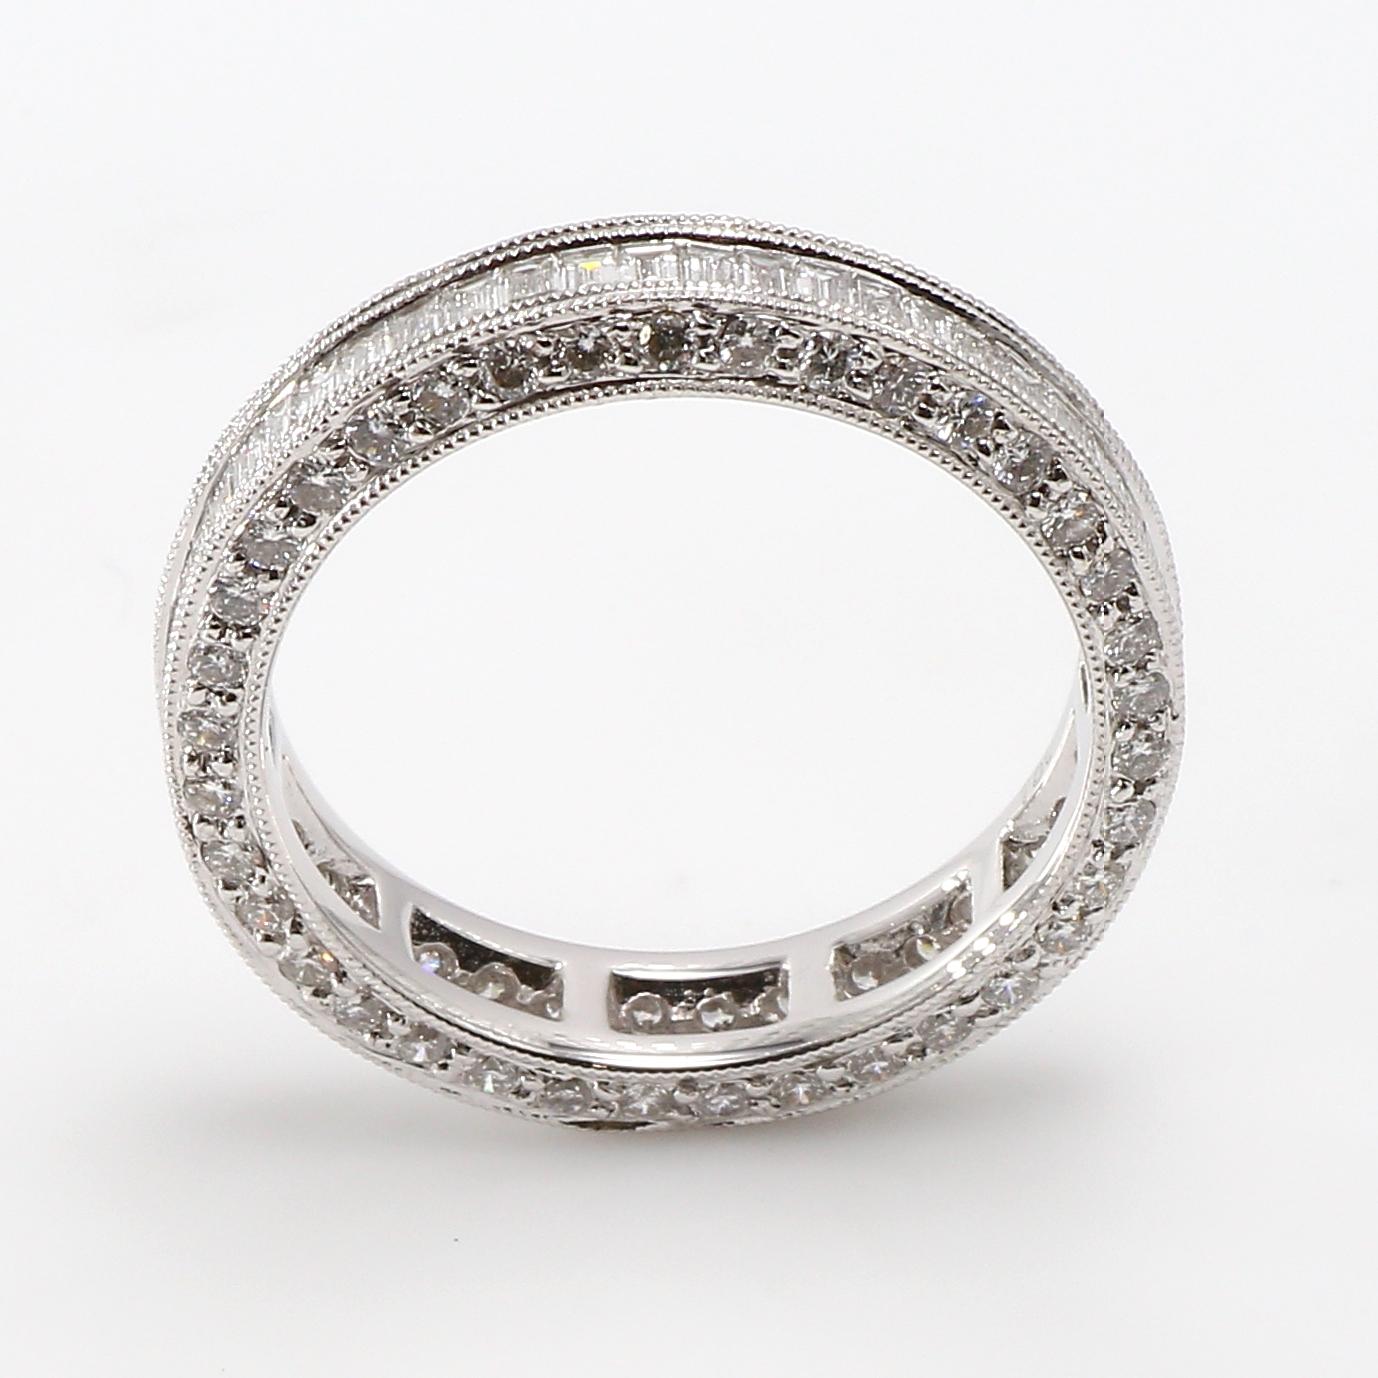 Beautifully Handcrafted Full Eternity Baguette Diamond Ring.
Baguette Cut White Diamonds totaling 0.52 Carats and Round Brilliant Cut White Diamonds totaling 0.64 Carats  G-H color, VS clarity.
Size 6 1/2 USA ring can not be sized, one of a kind.